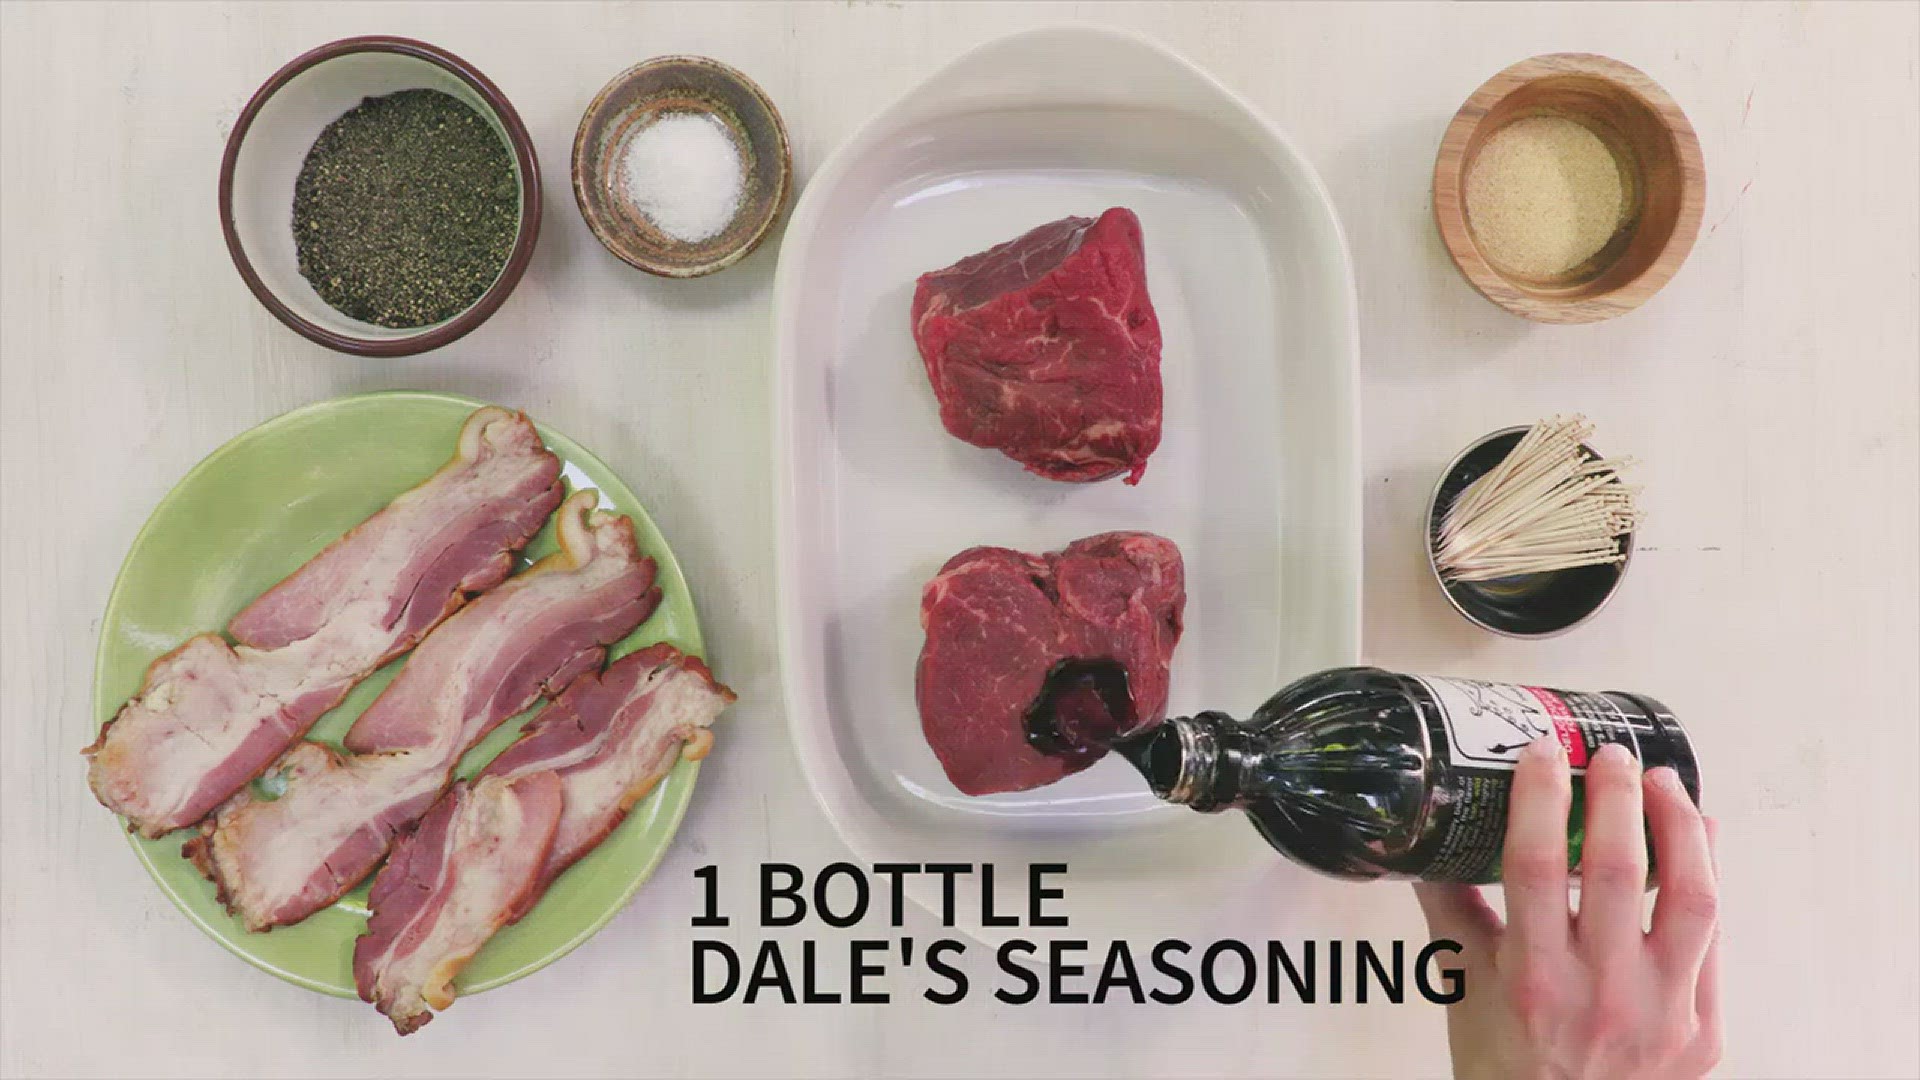 Try out this sizzing summer recipe from Dale's Seasoning (Sponsored post)